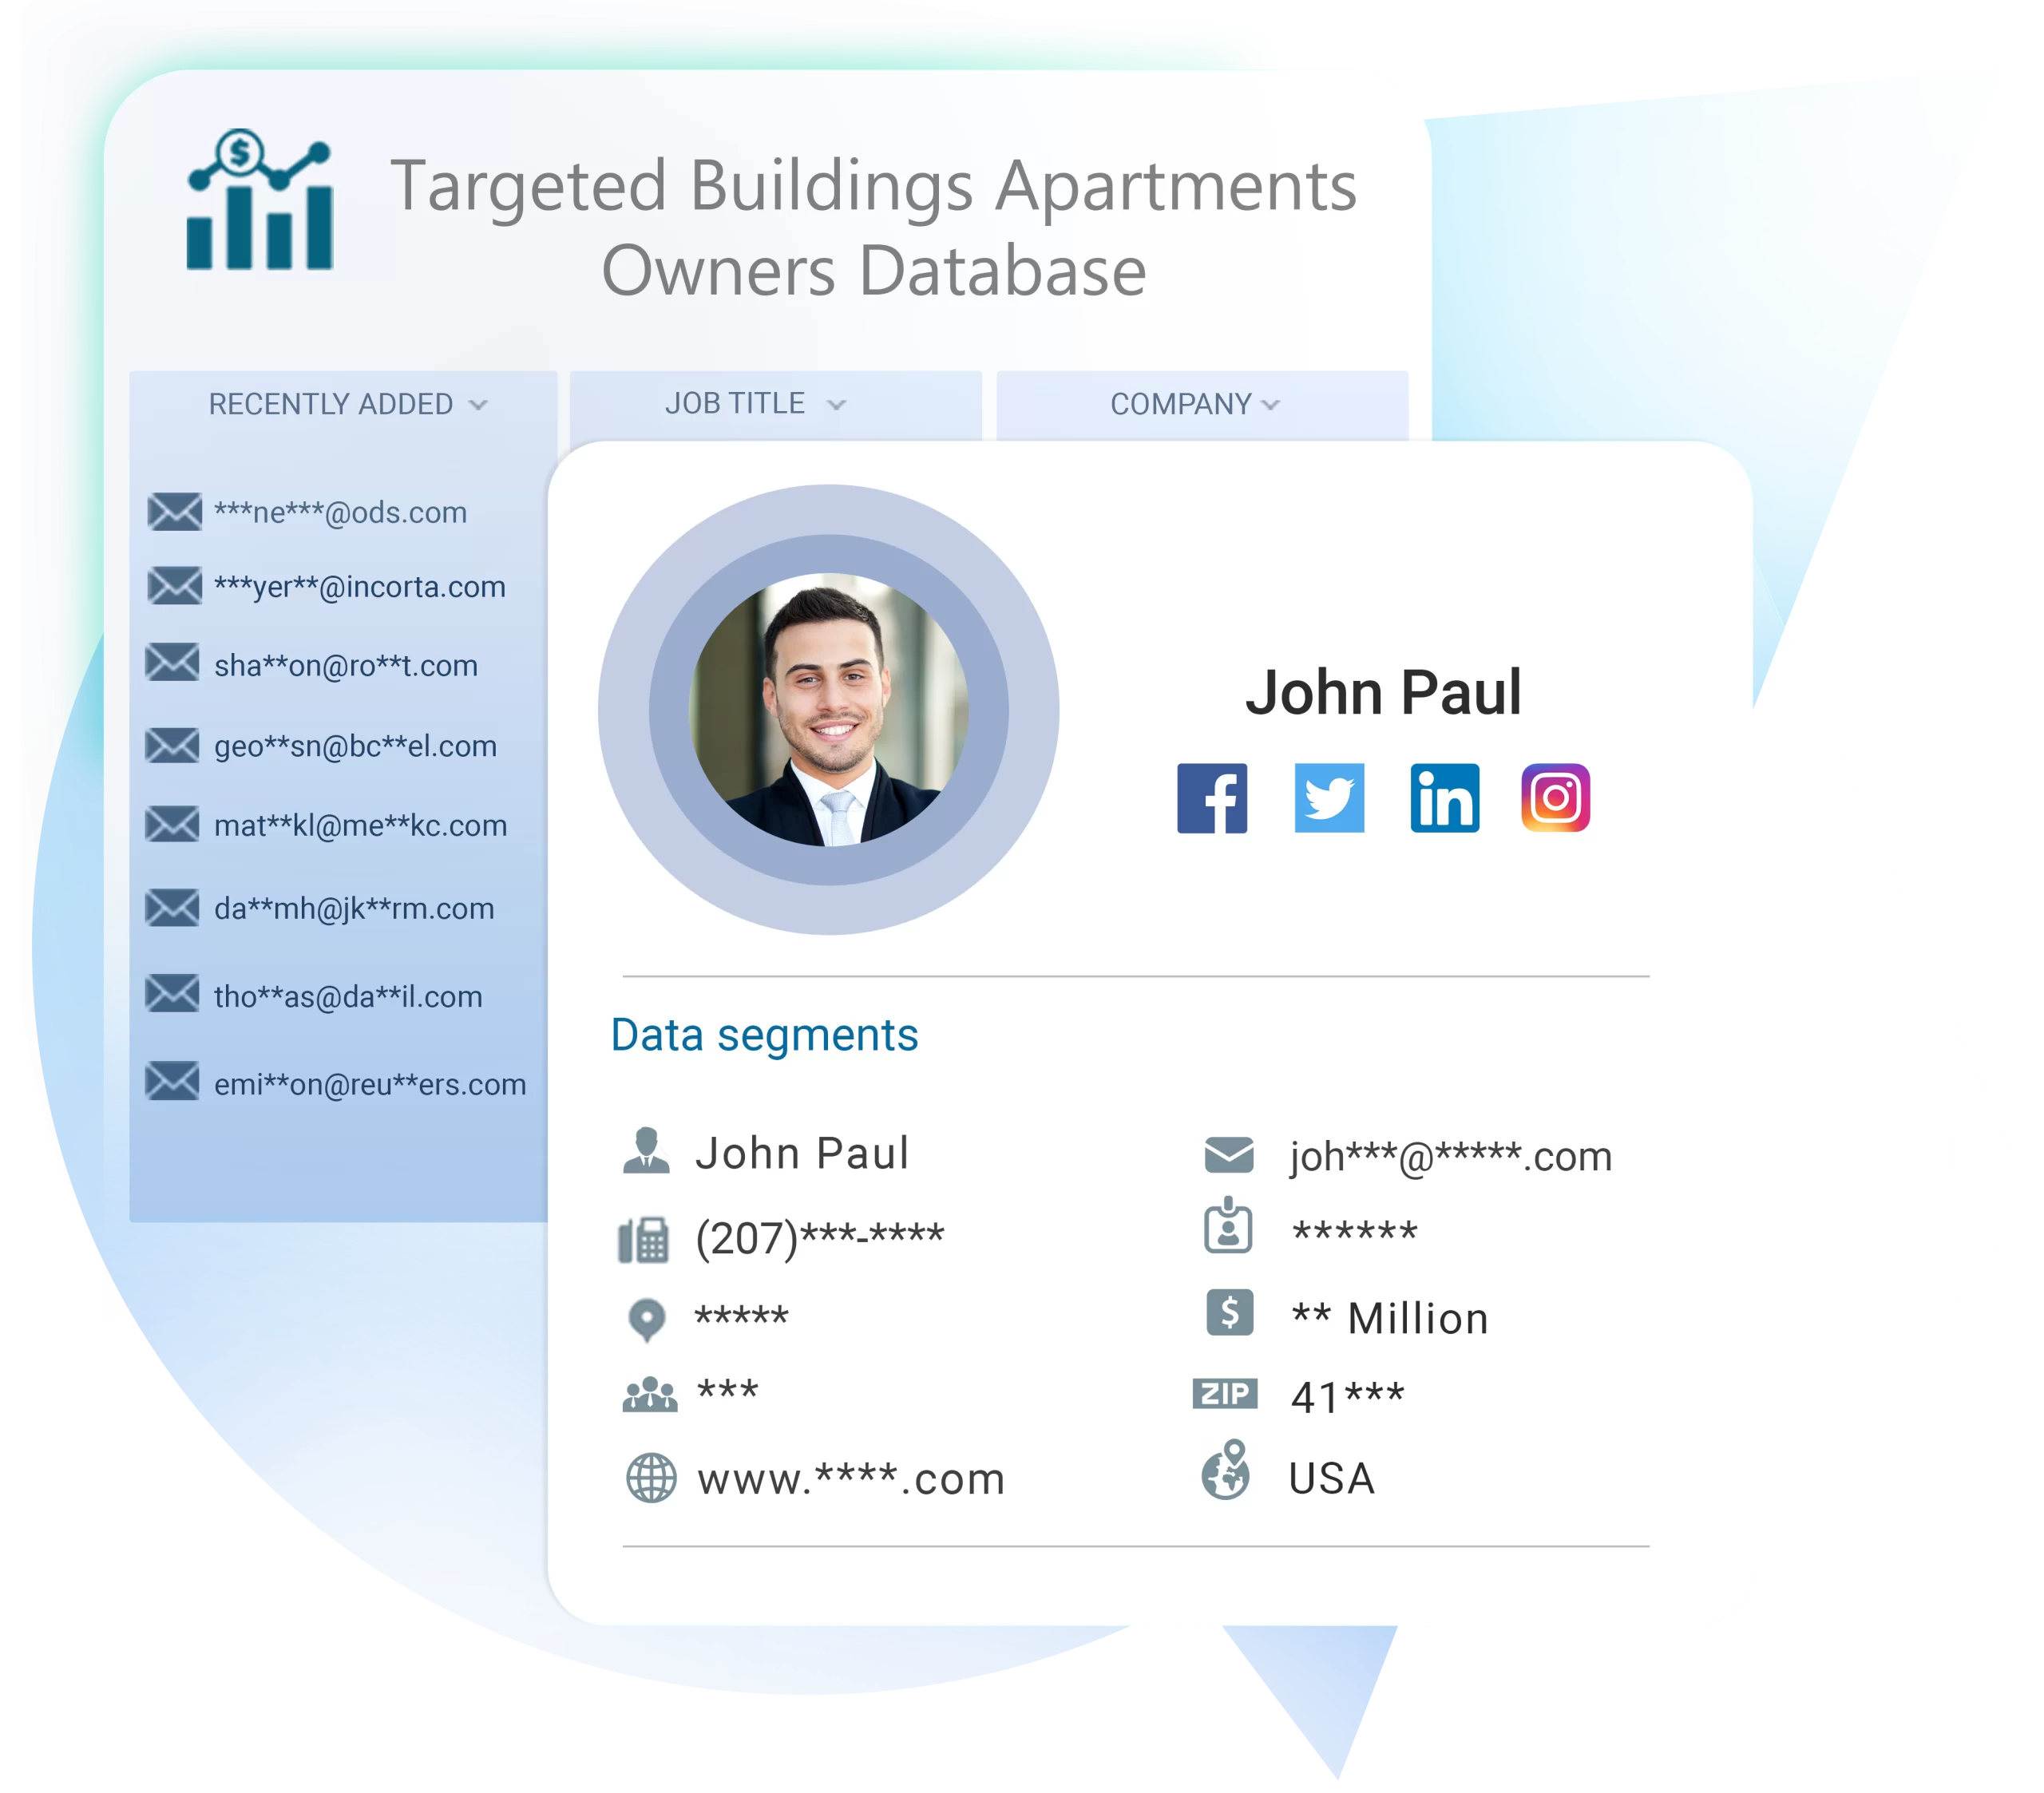 Buildings Apartments Owners Database